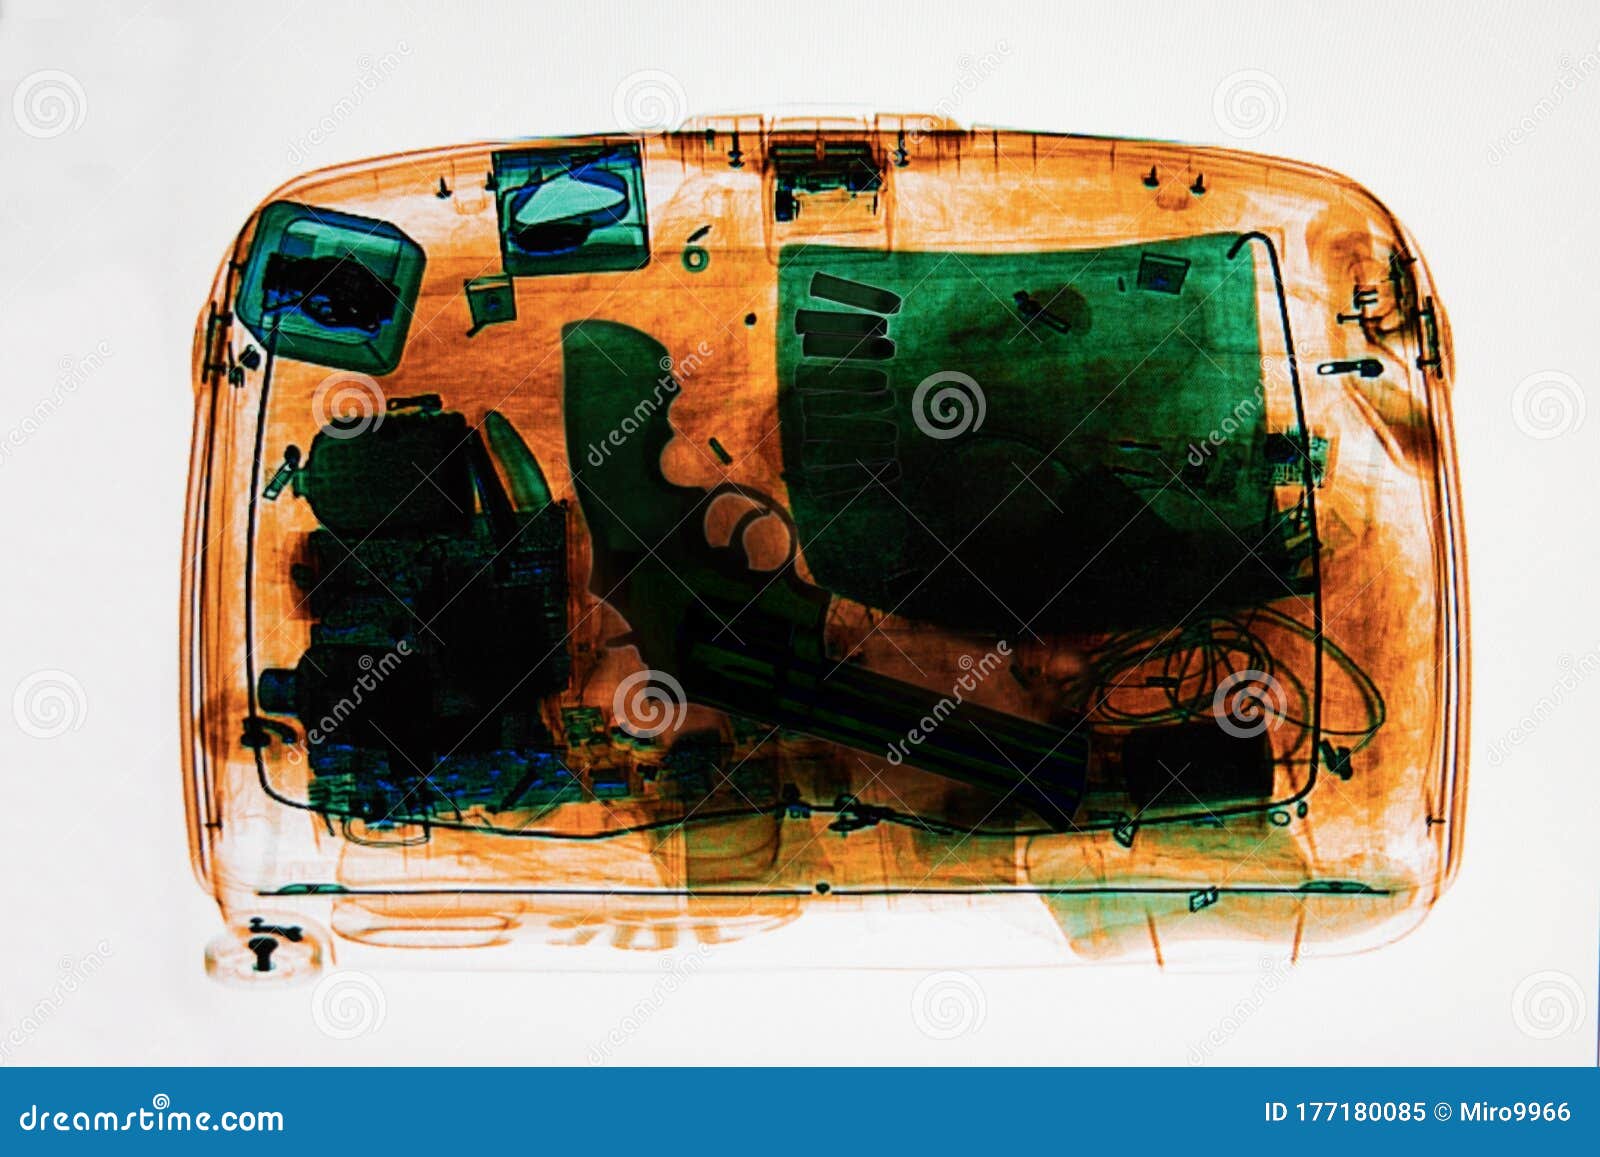 Airport baggage xray scanner  Stock Image  C0193266  Science Photo  Library